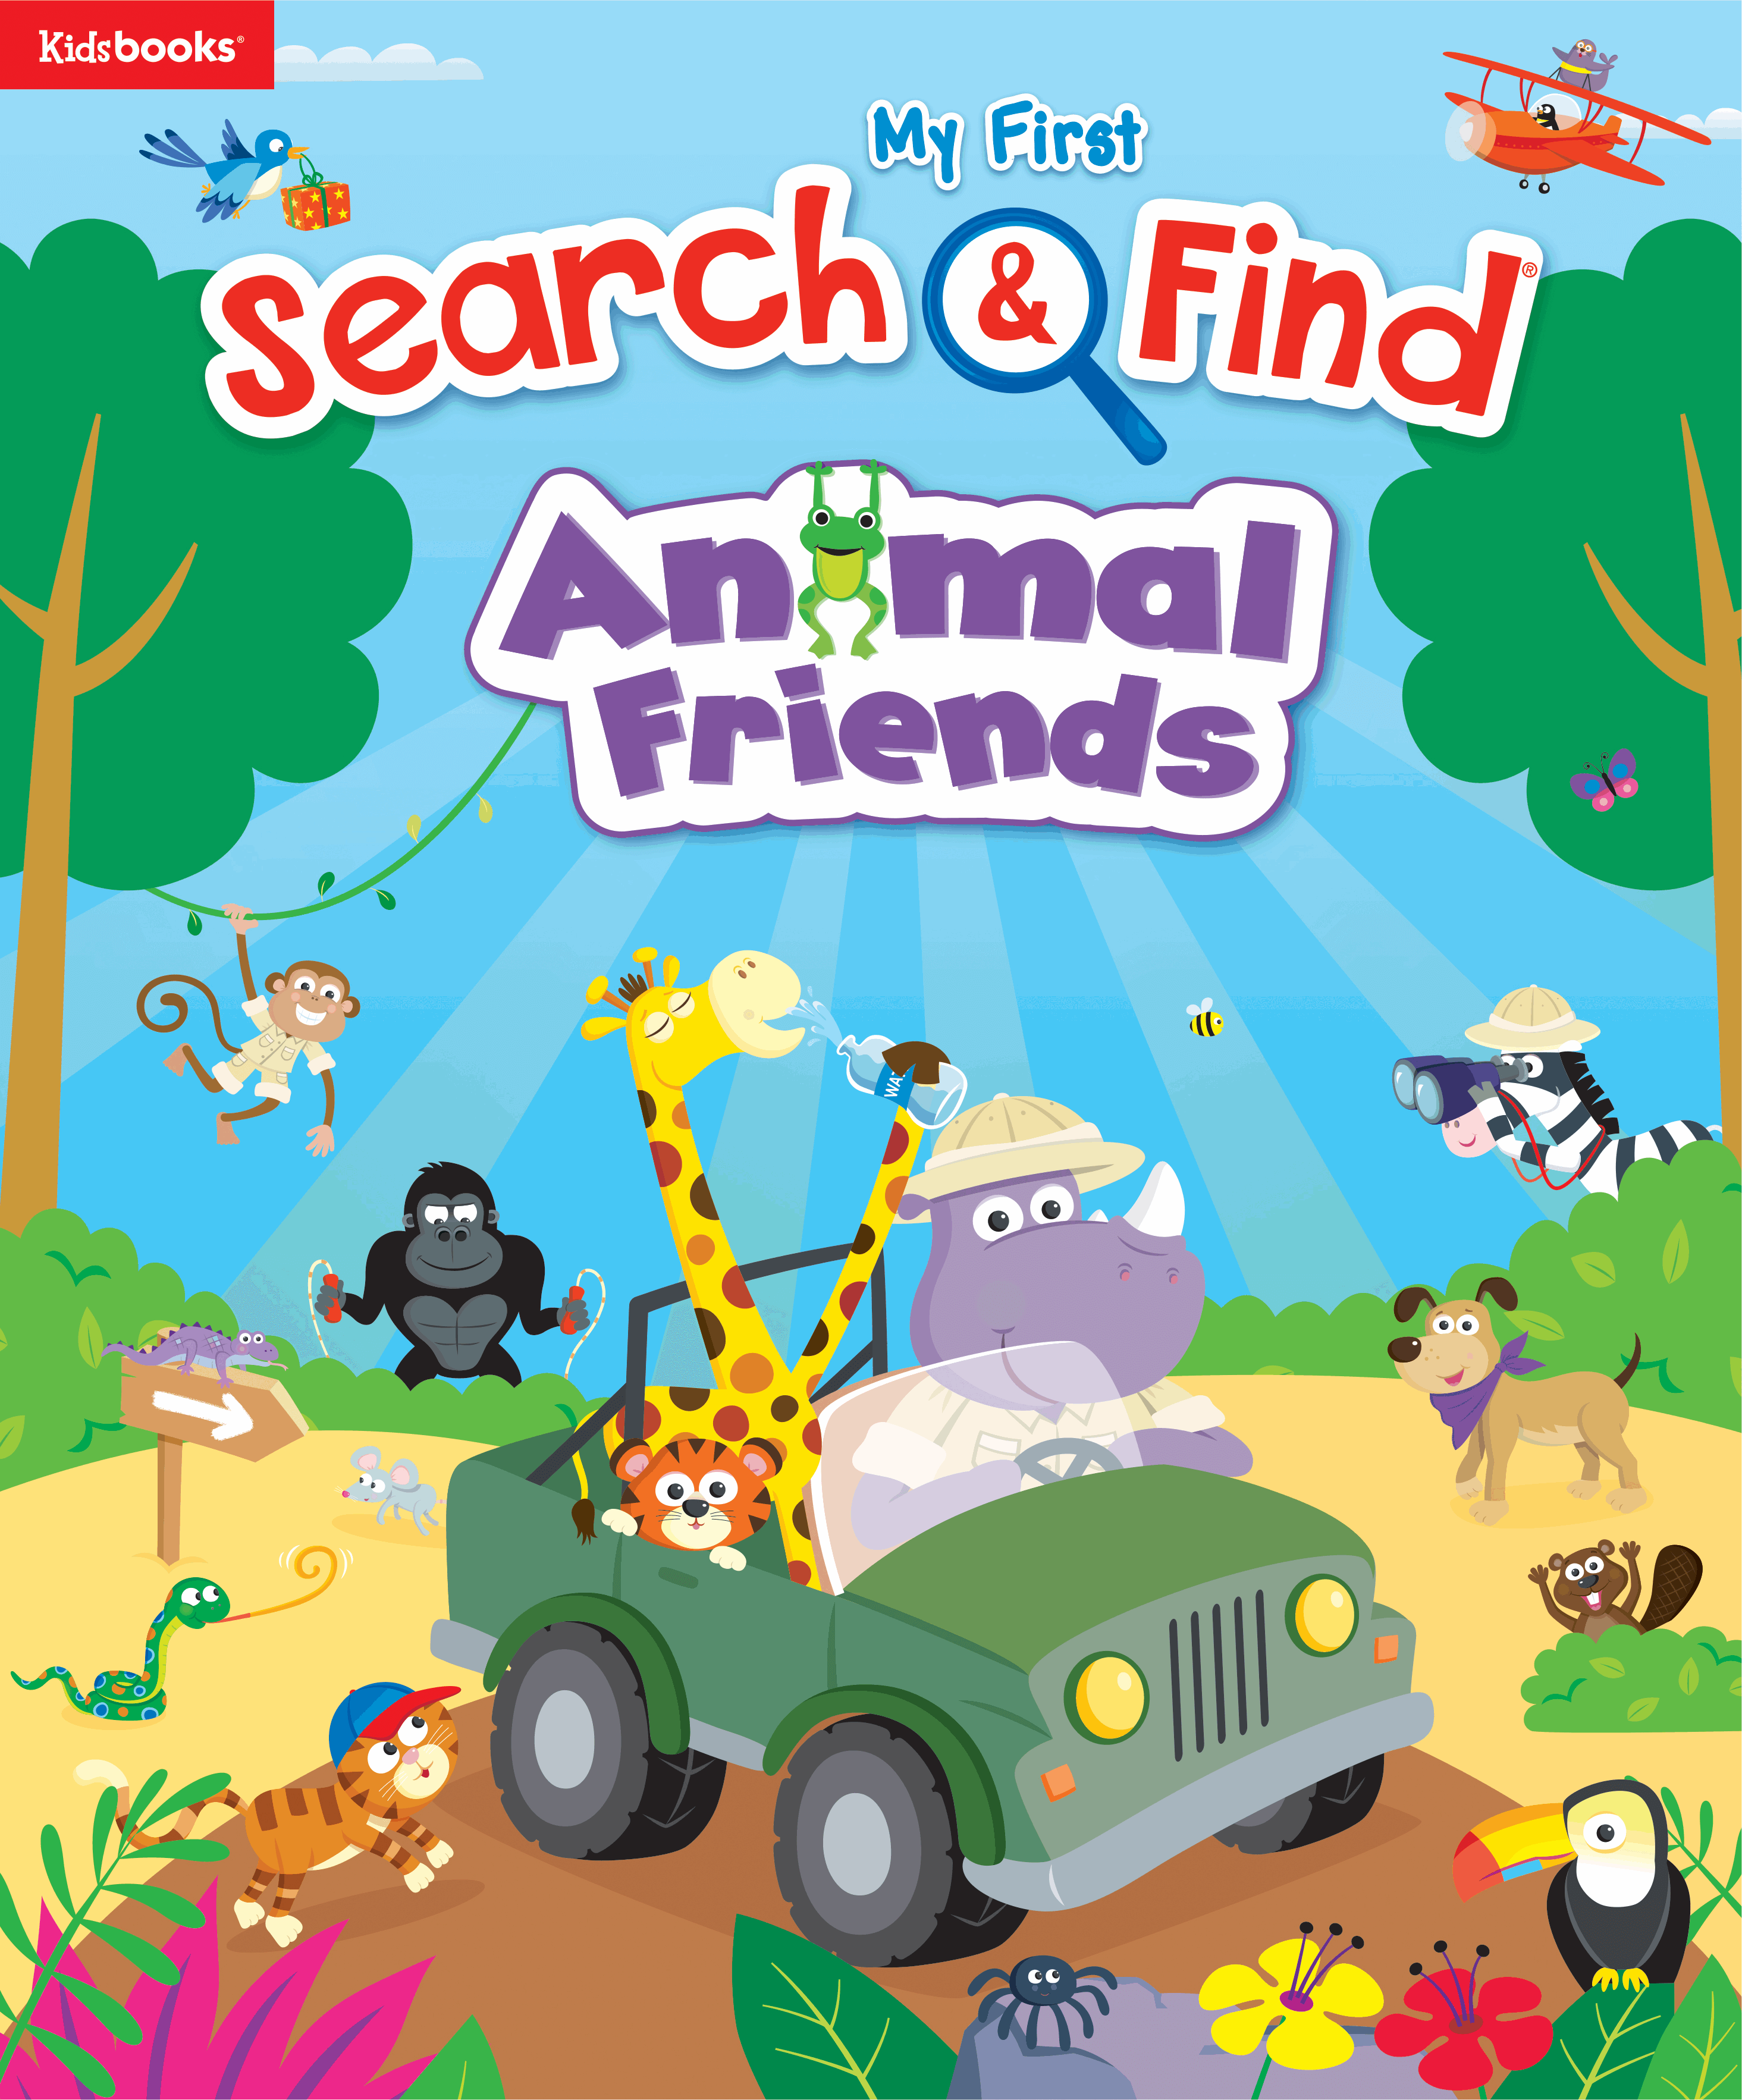 My First Search & Find: Animal Friends | Kidsbooks Publishing